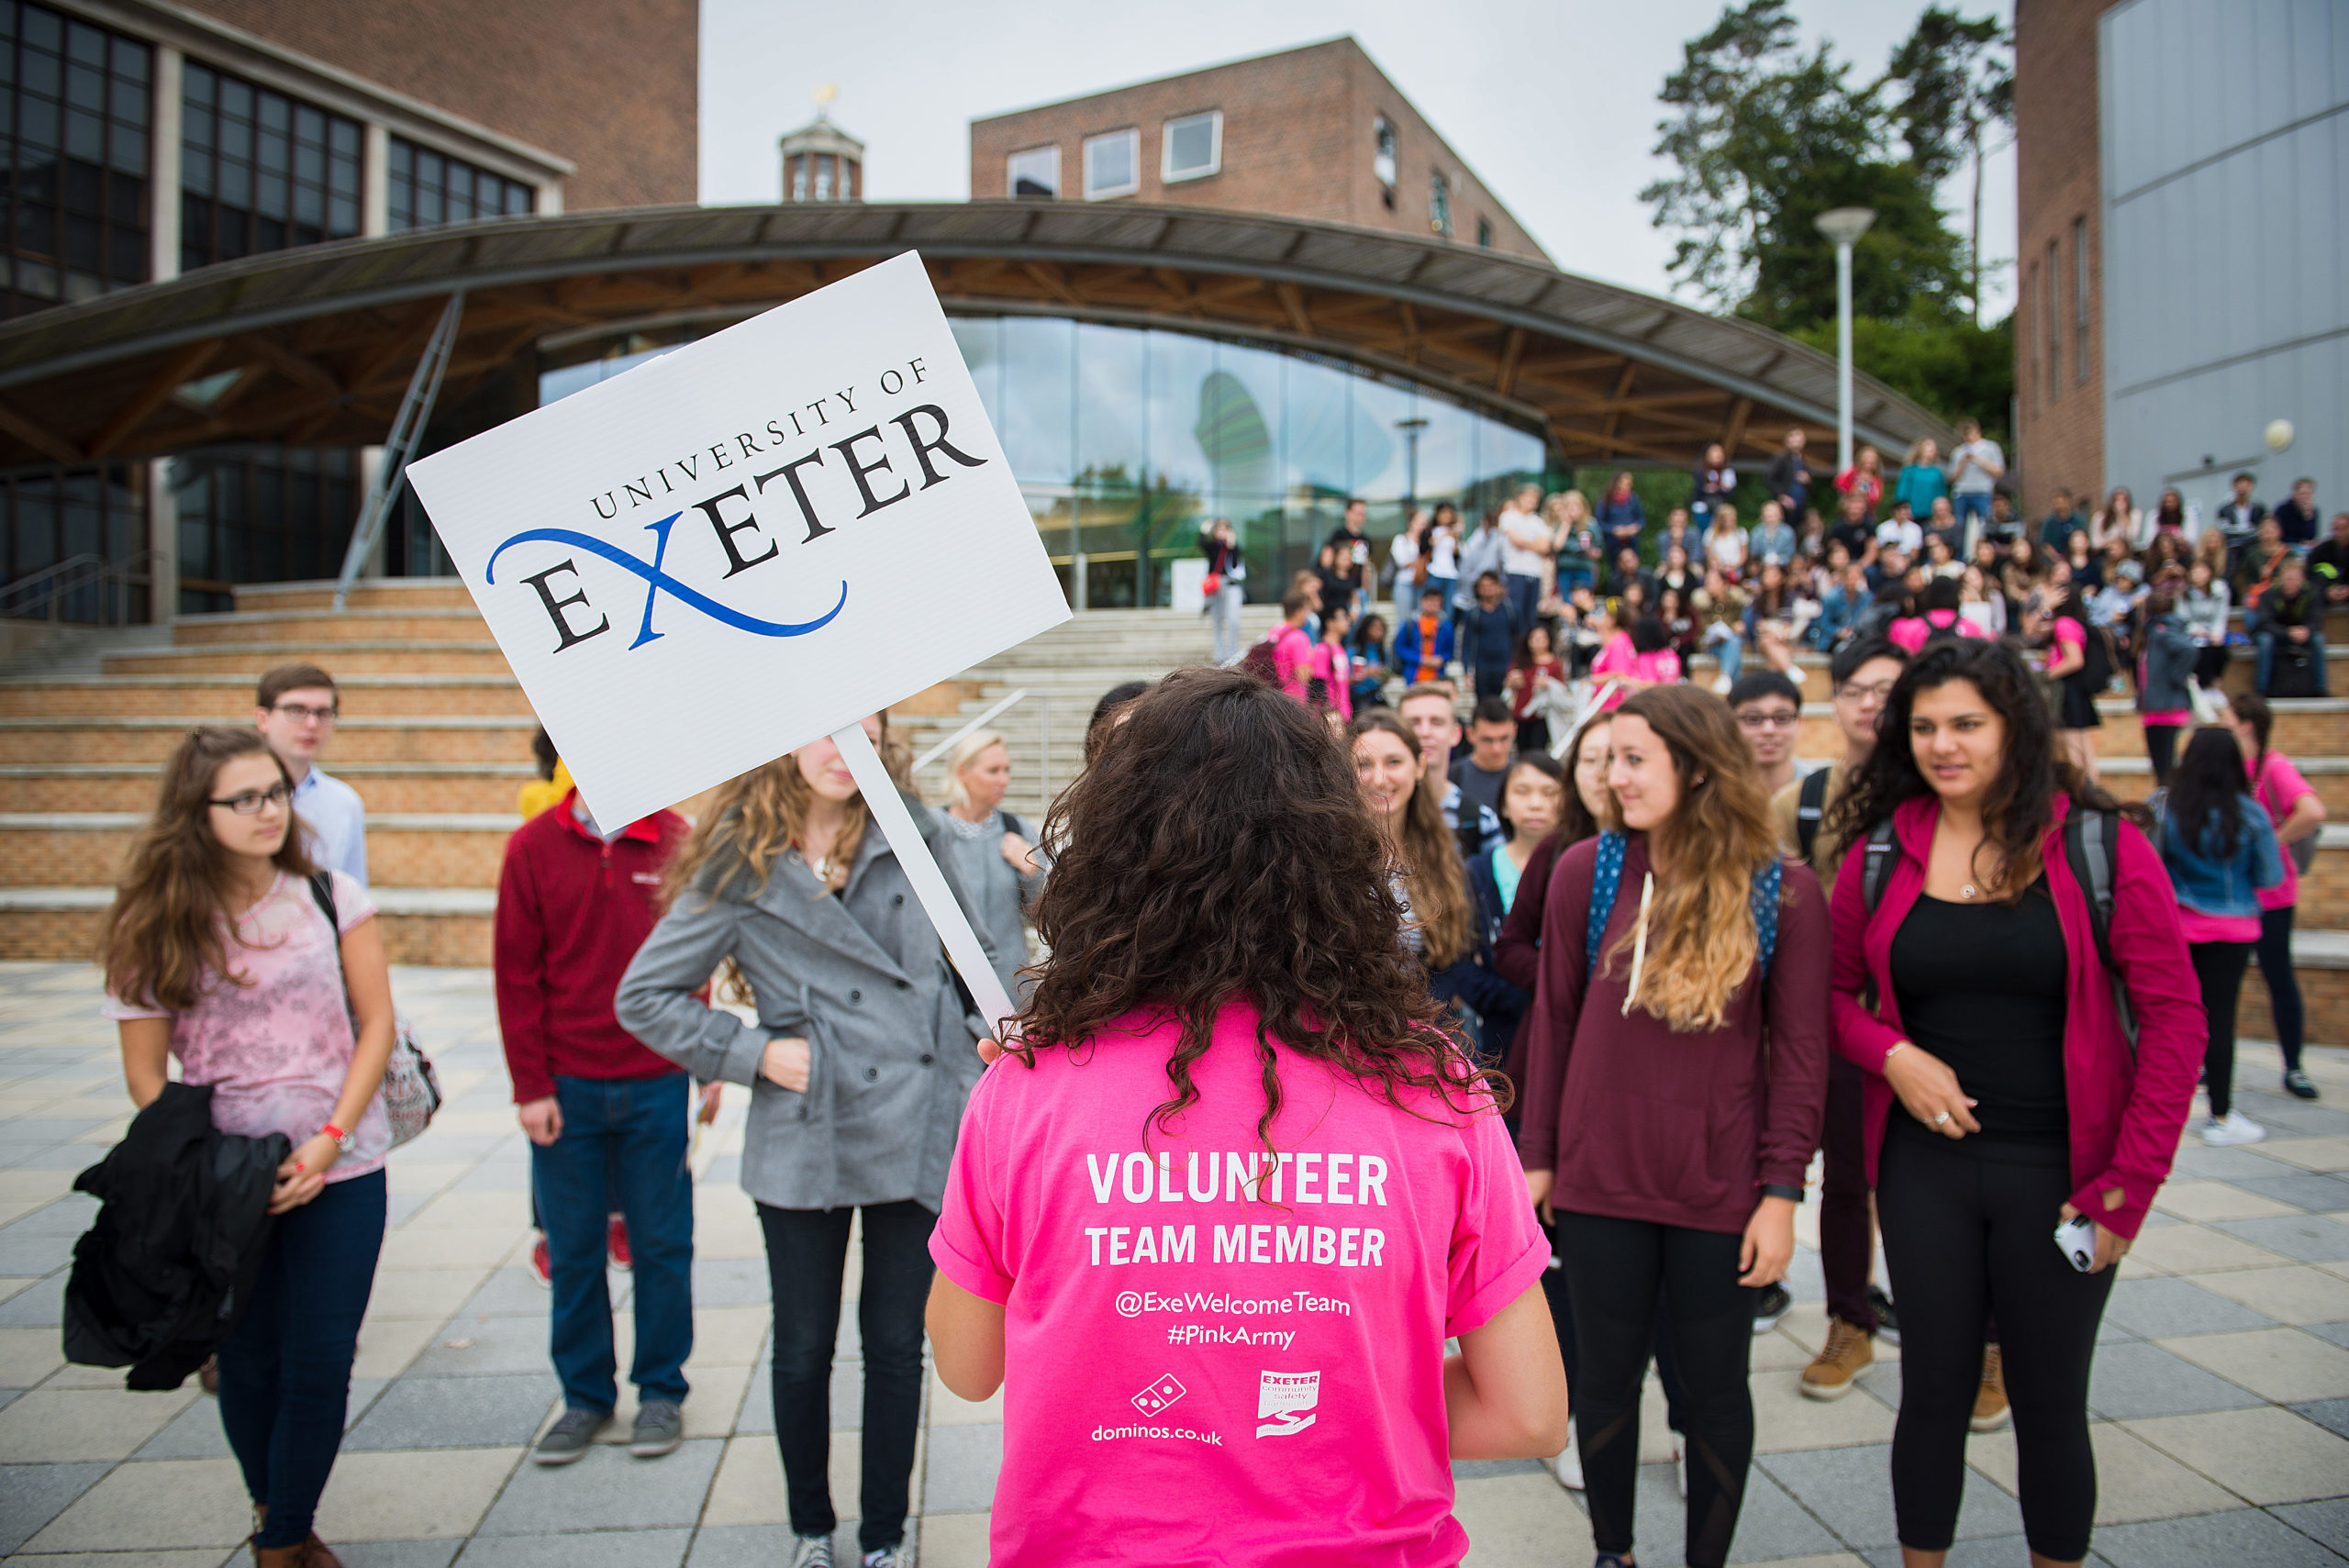 Not sure what to do in Fresher’s Week? We’ve got your back!